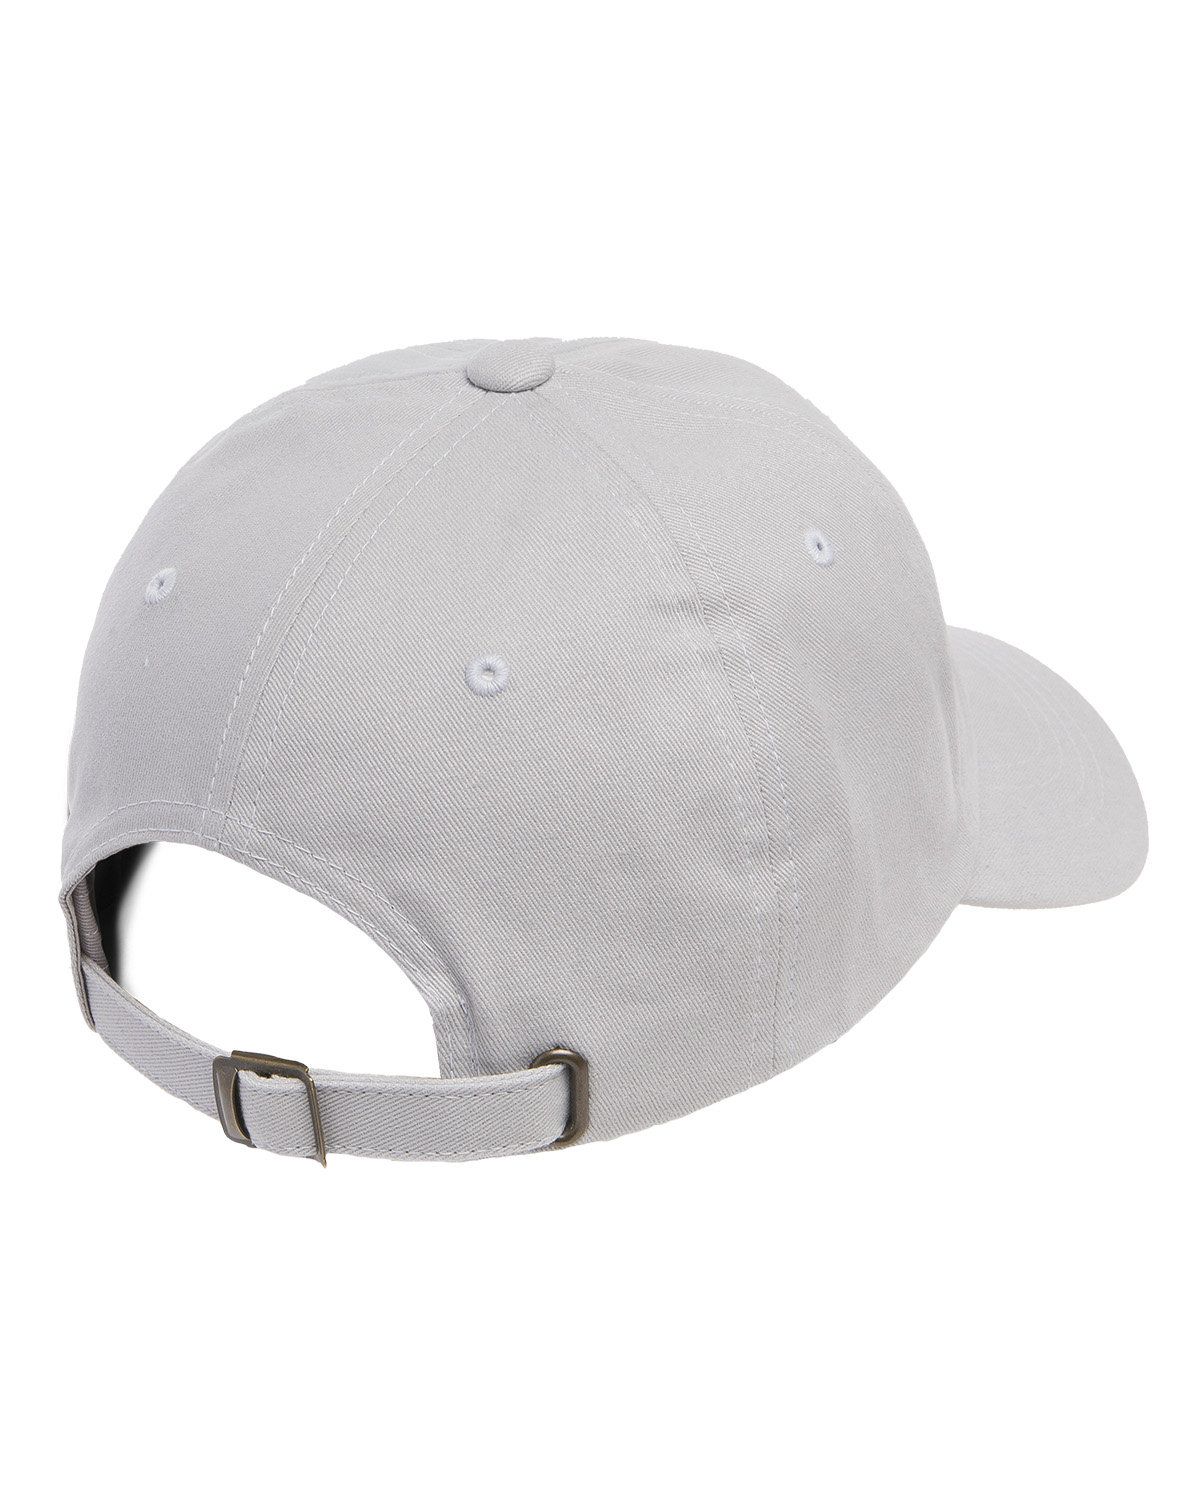 Yupoong Peached Cotton Twill Dad Cap 6245PT Baseball Hat 